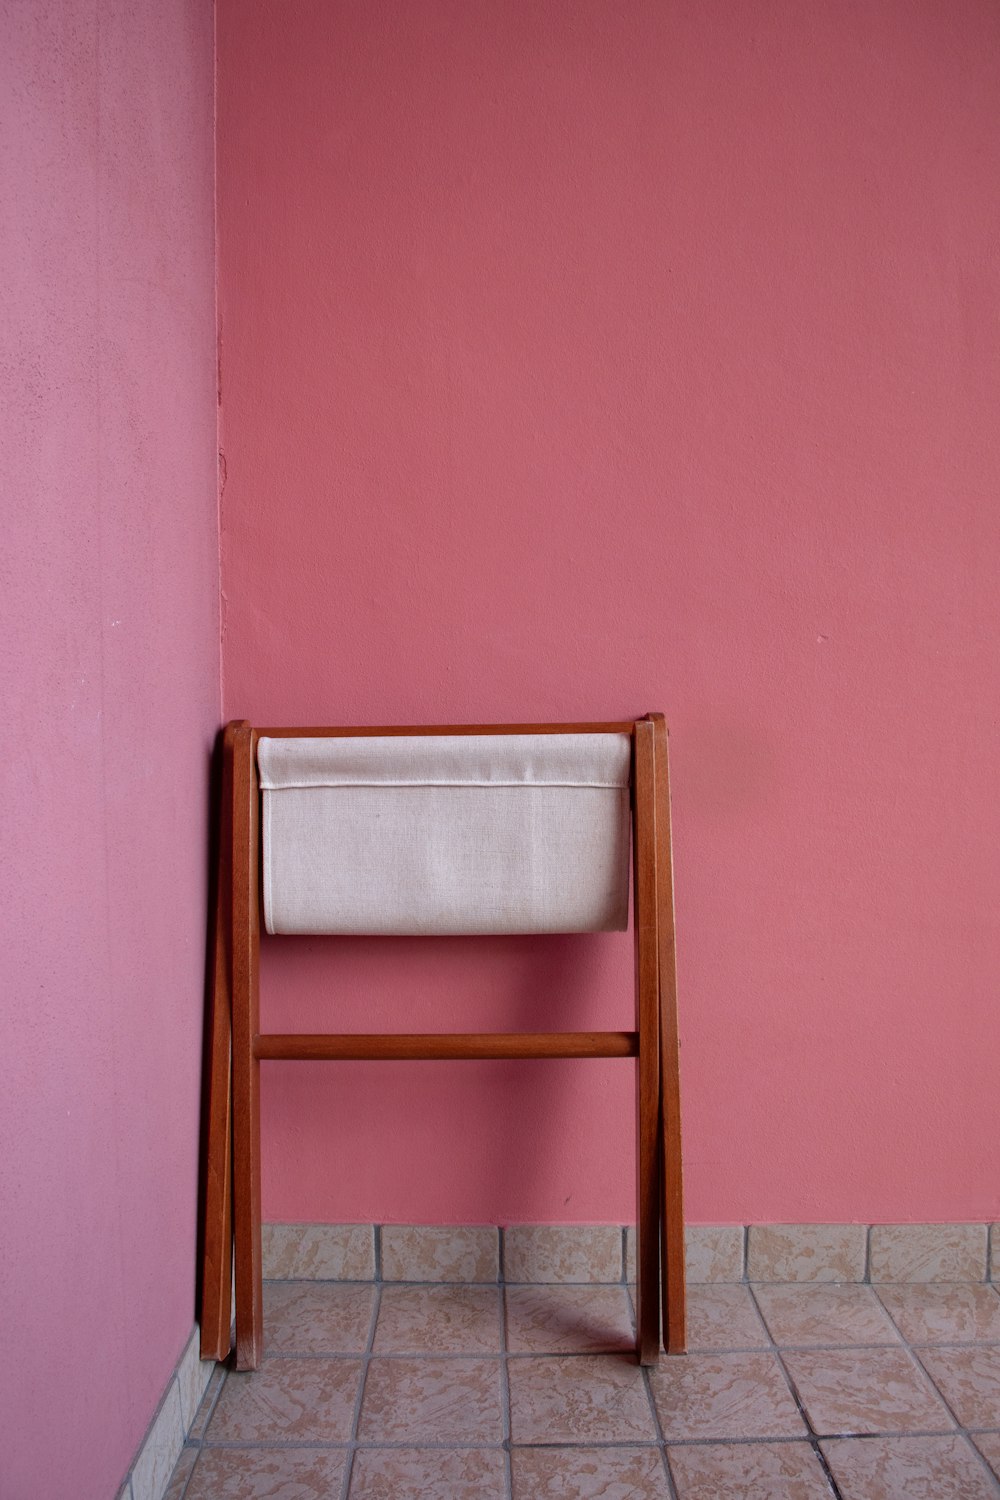 a wooden chair against a pink wall in a room